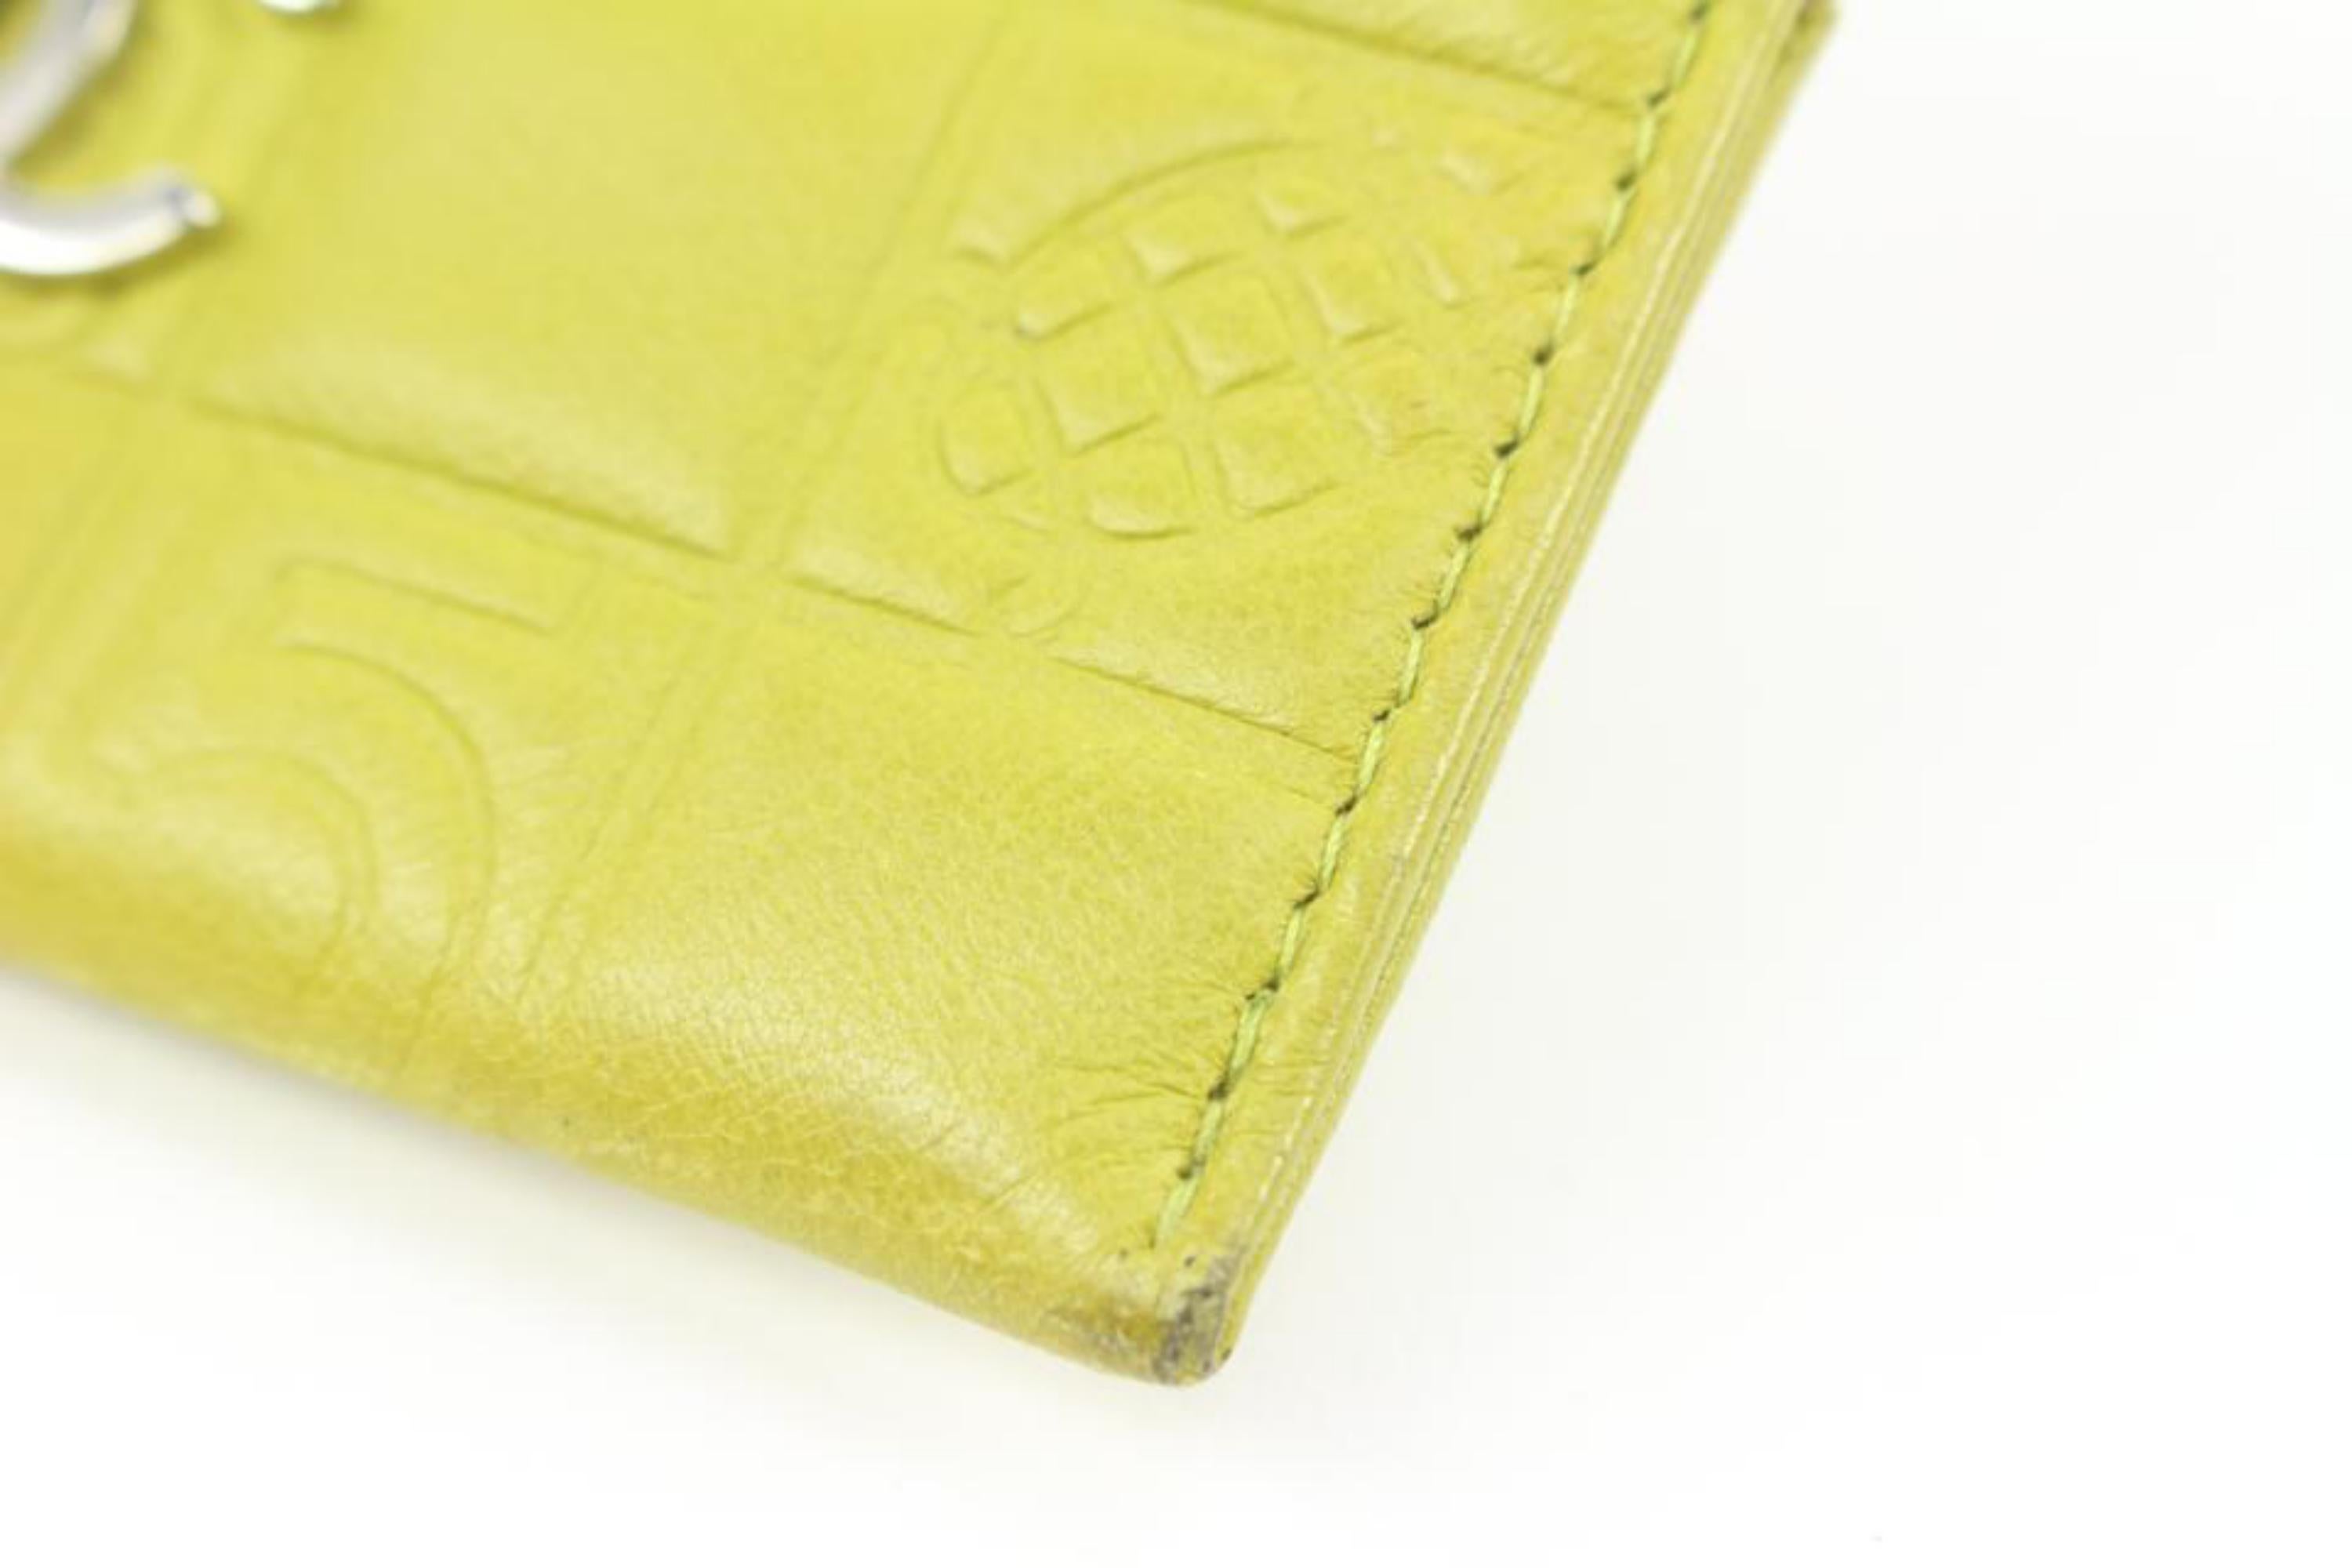 Chanel Lime Green Quilted Chocolate Bar Card Holder Wallet Case 52ck322s
Date Code/Serial Number: 8643173
Made In: France
Measurements: Length:  4